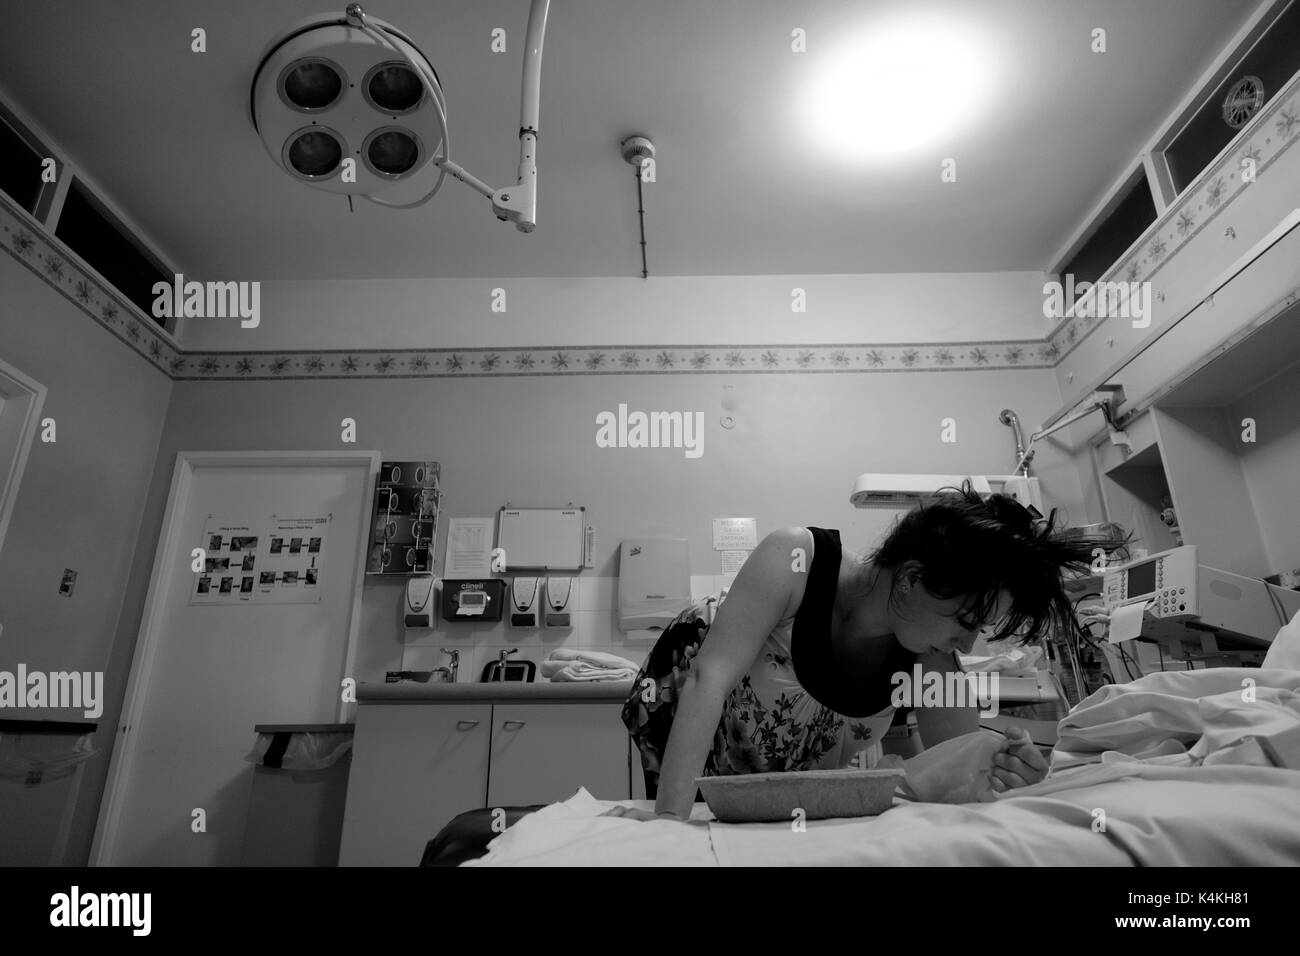 Black and white image of a female about to give birth in Luton and Dunstable Hospitals delivery suite. Credit - Lee Ramsden / ALAMY Stock Photo